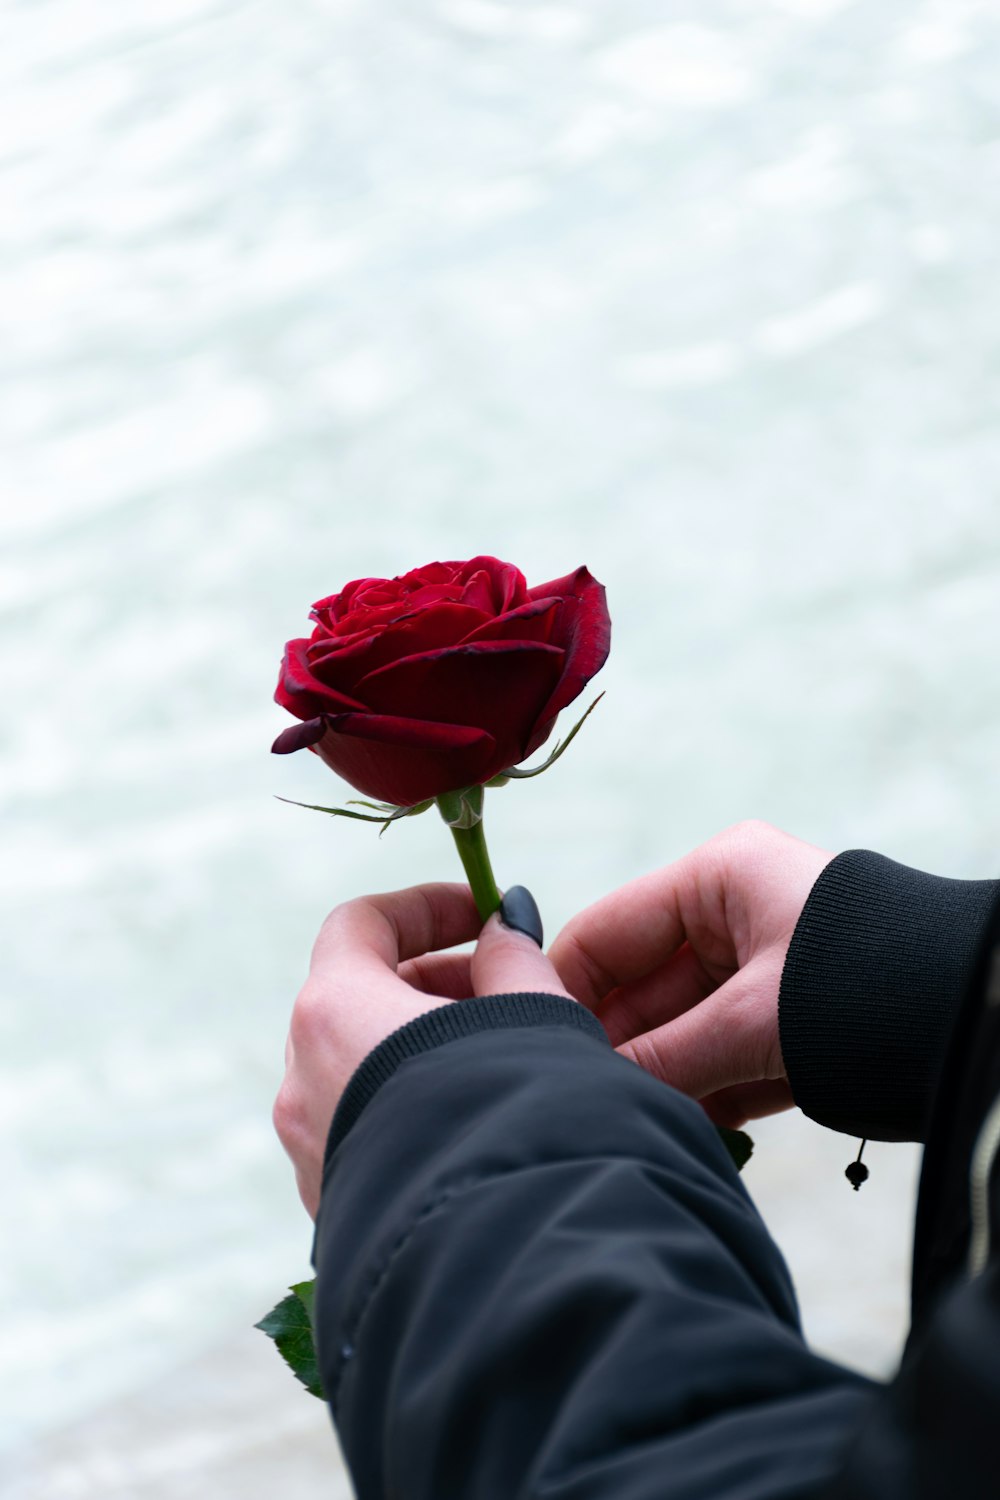 person holding red rose during daytime